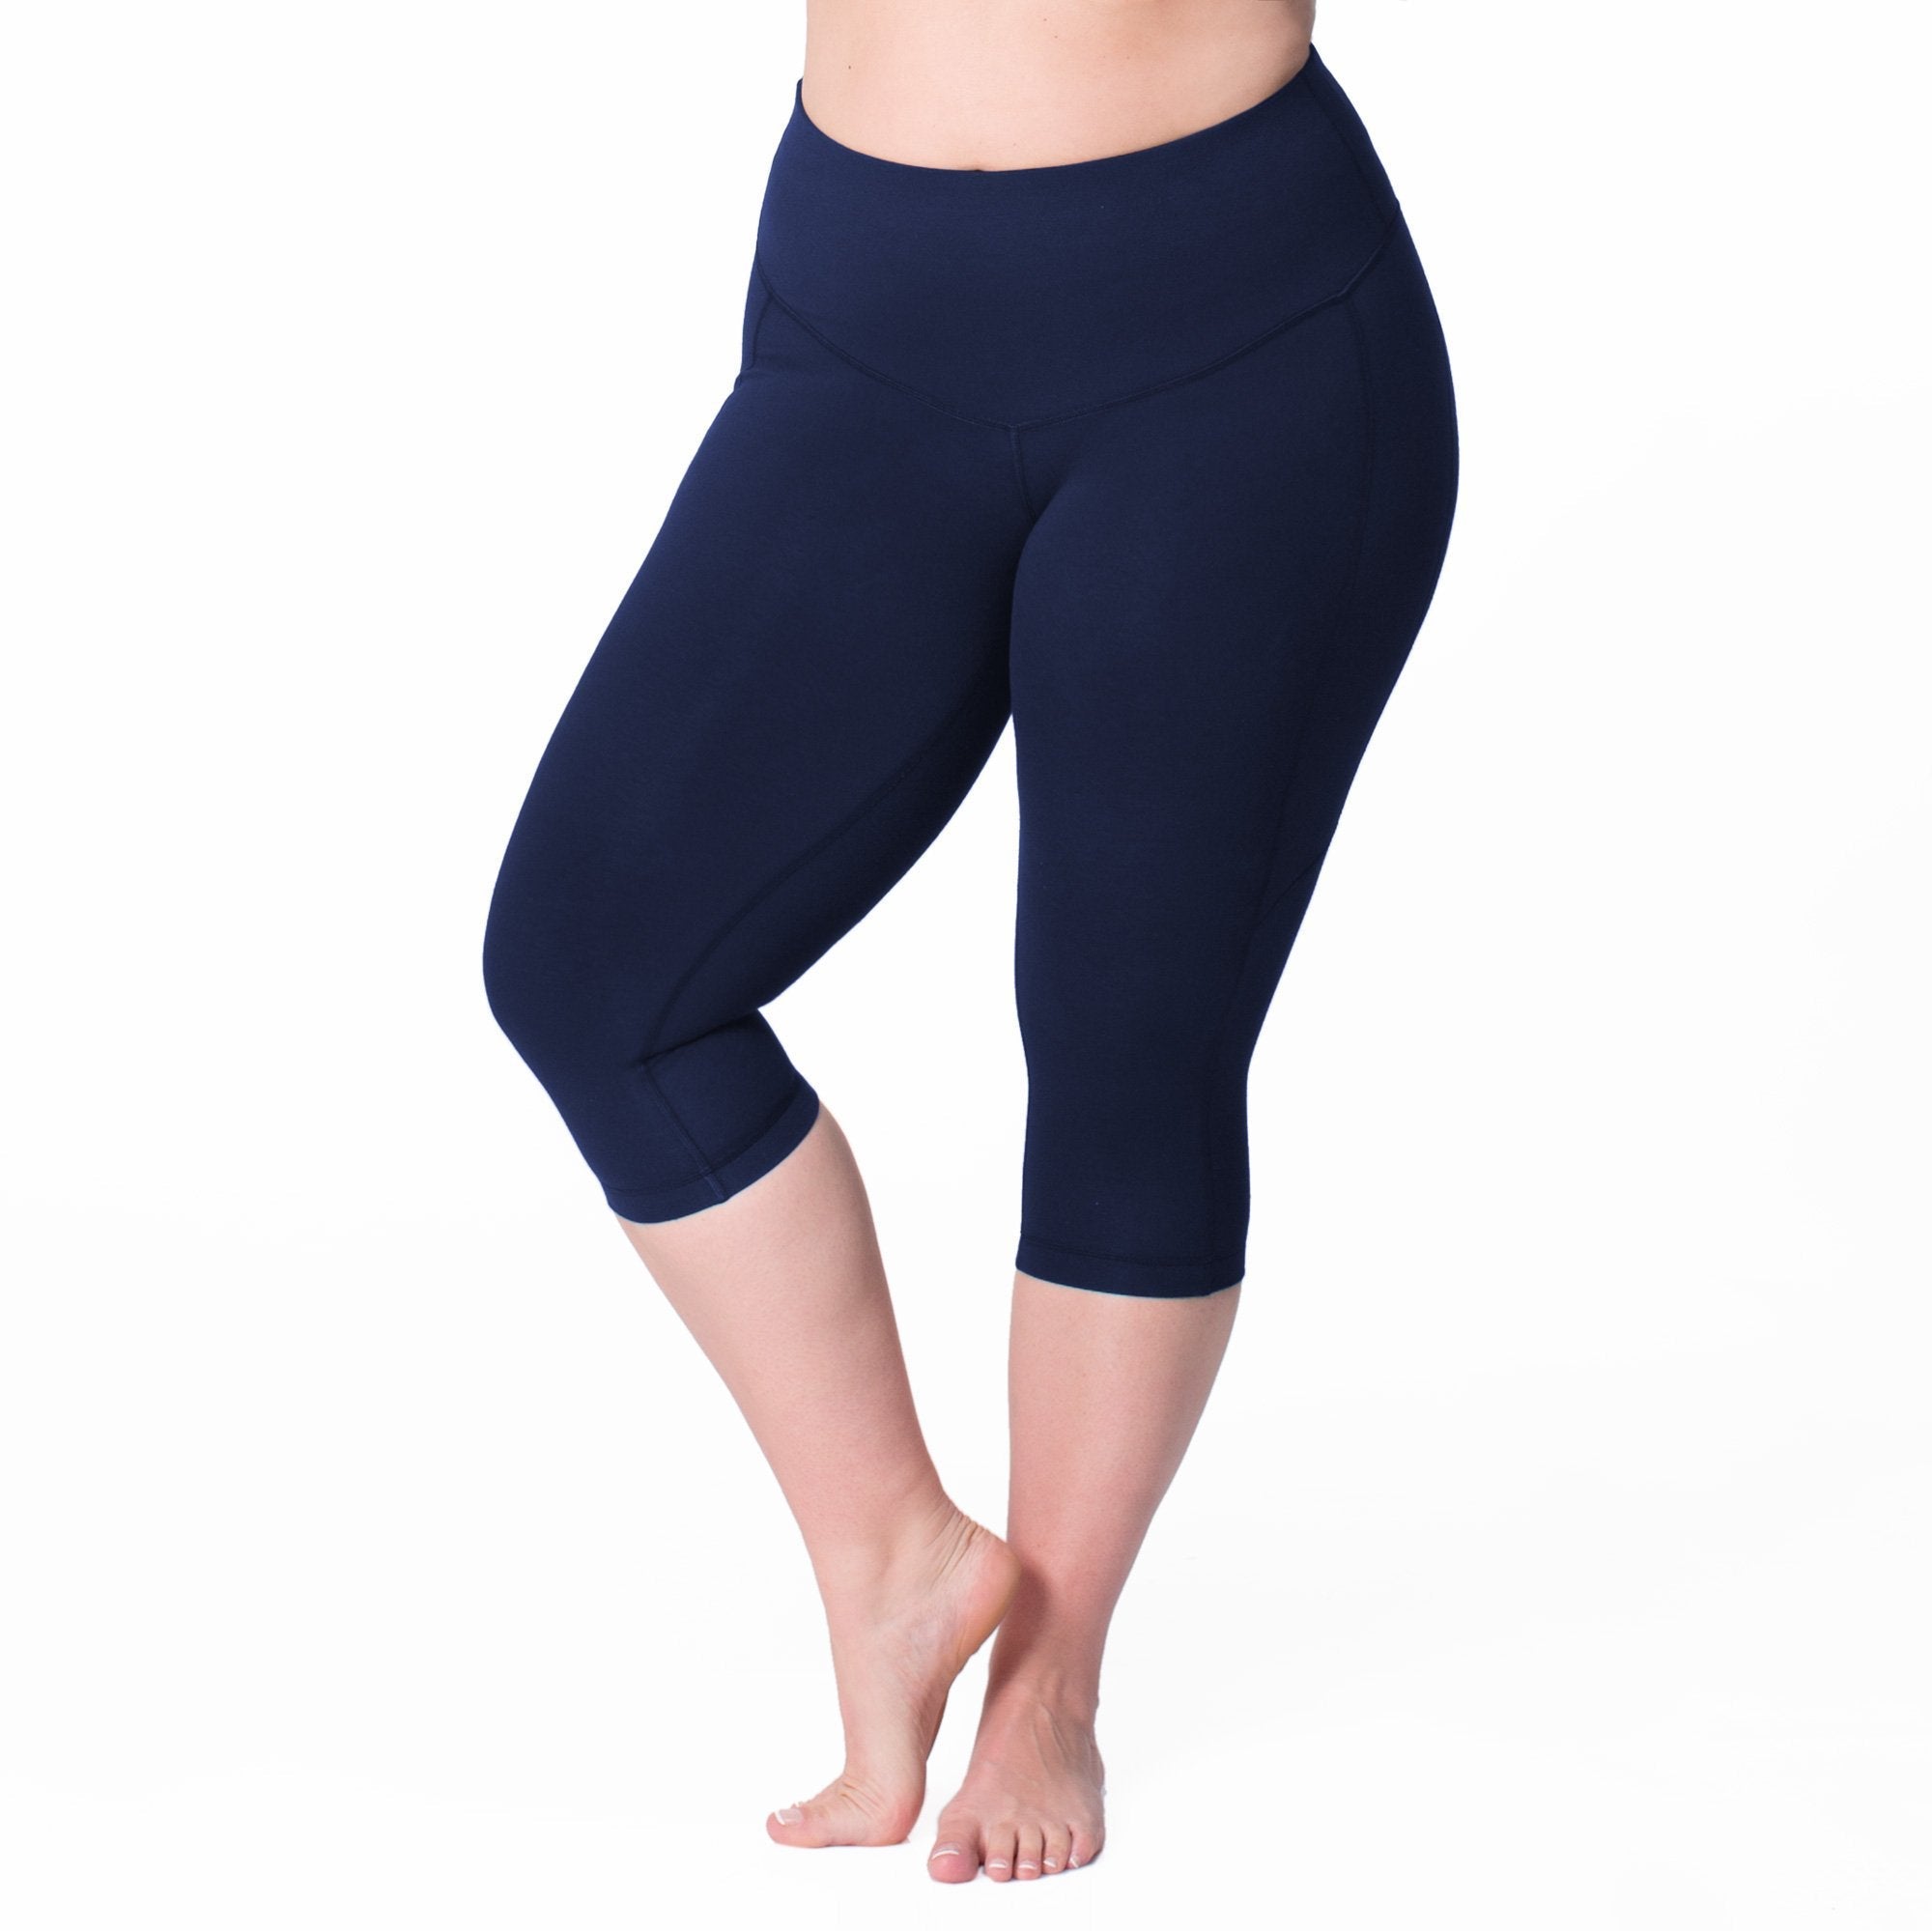 leggings dark blue plus size control and shaping babalú.the in the suplex